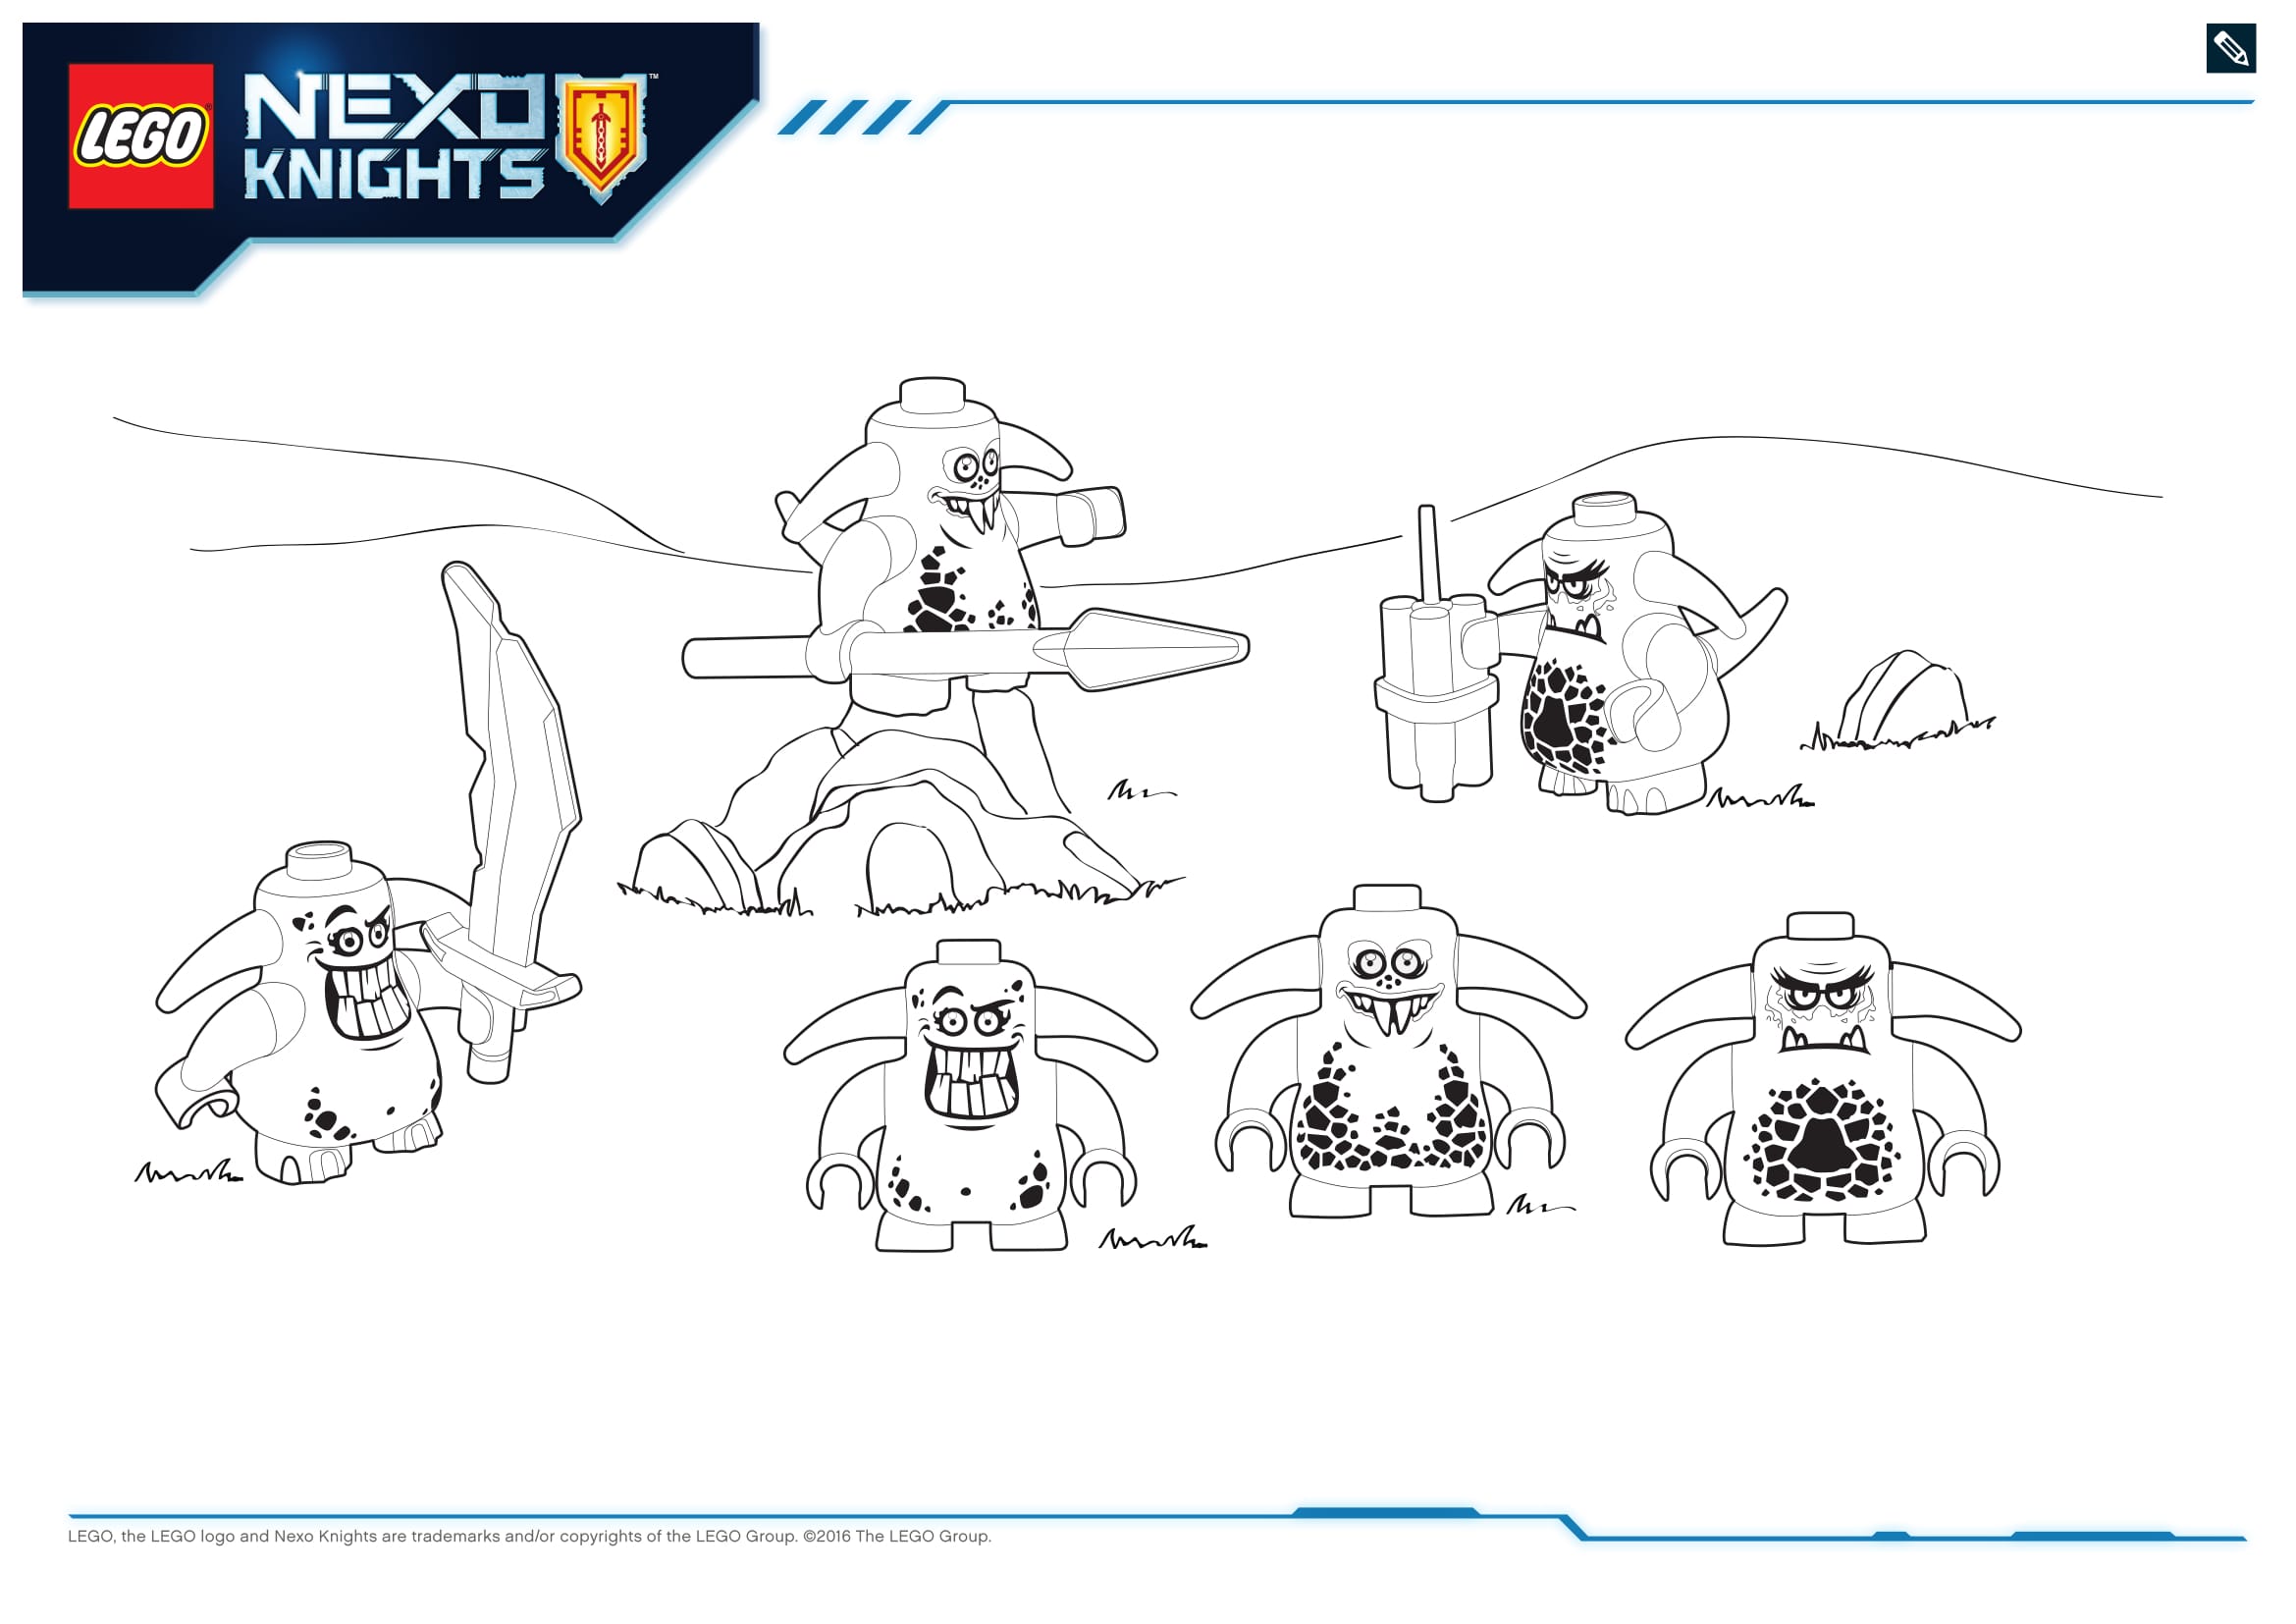 Lego Nexo Knights Monster Productss 6